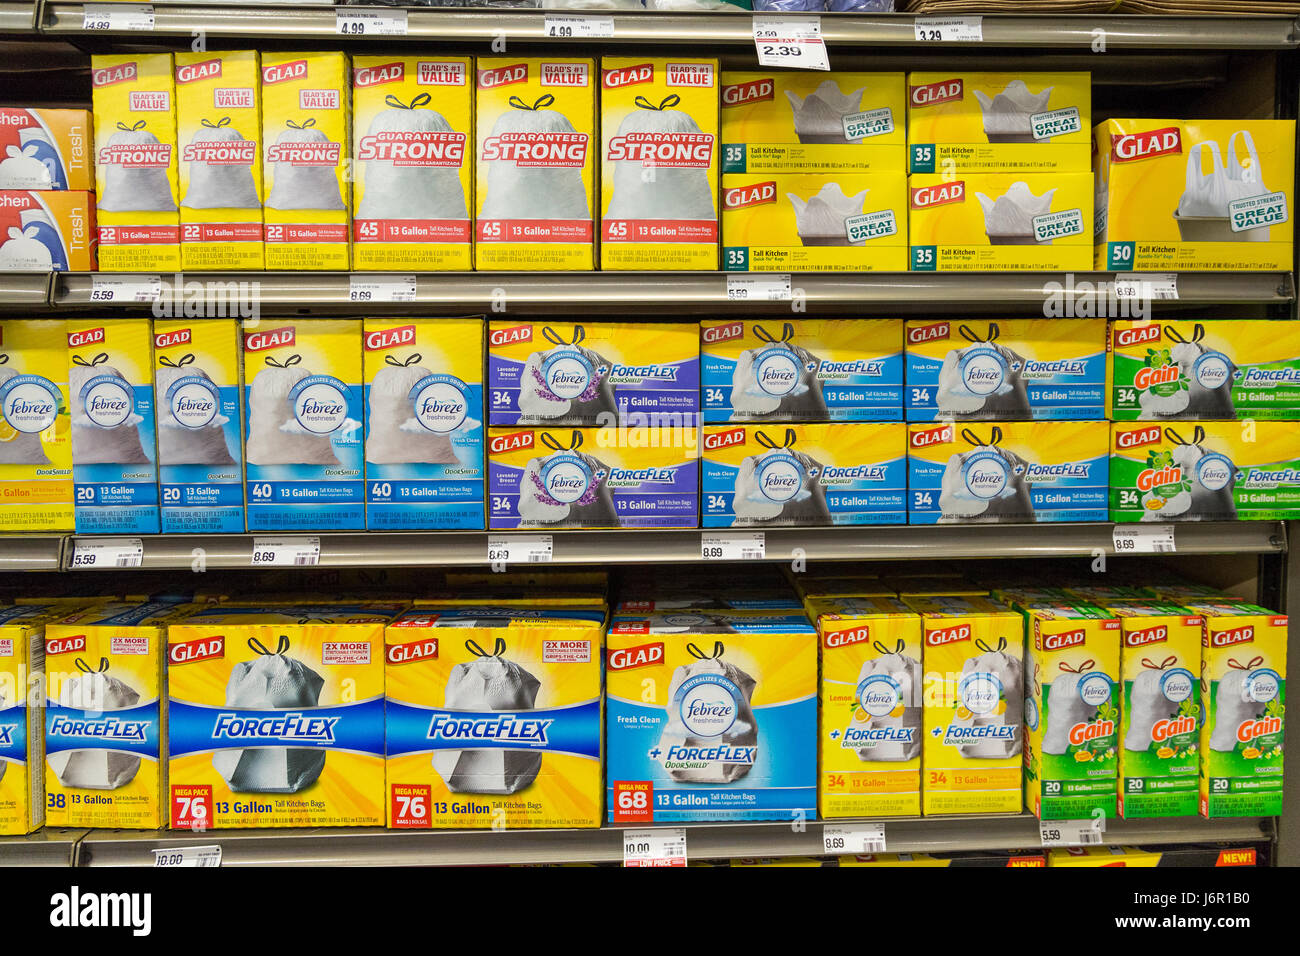 boxes of Glad brand garbage bags on the shelves of a grocery store Stock Photo